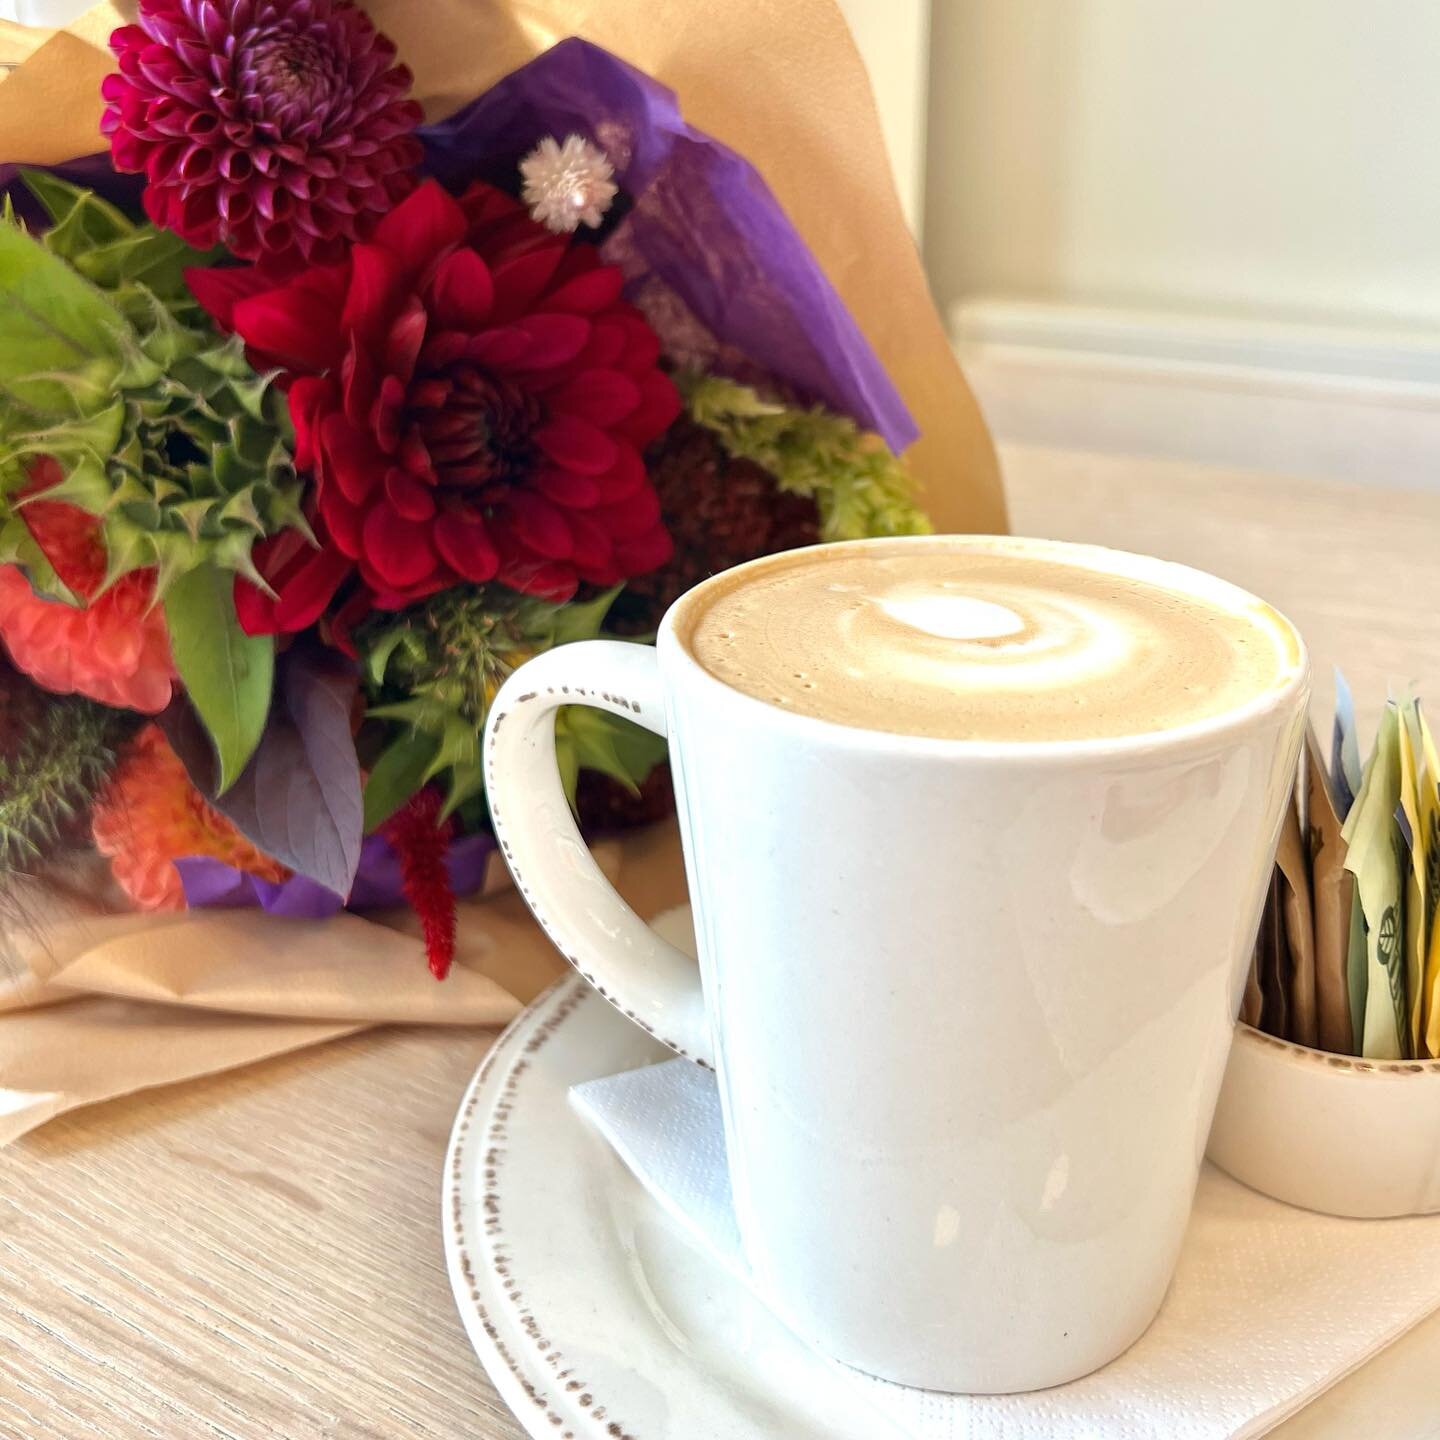 The best way to start the day? A vanilla latte from @gardenandgroundsbistro + and a big bouquet of fall blooms for a new friend. If you haven&rsquo;t checked out this cute spot yet, what are you waiting for?

#coffeeandblooms #coffeeandflowers #balti